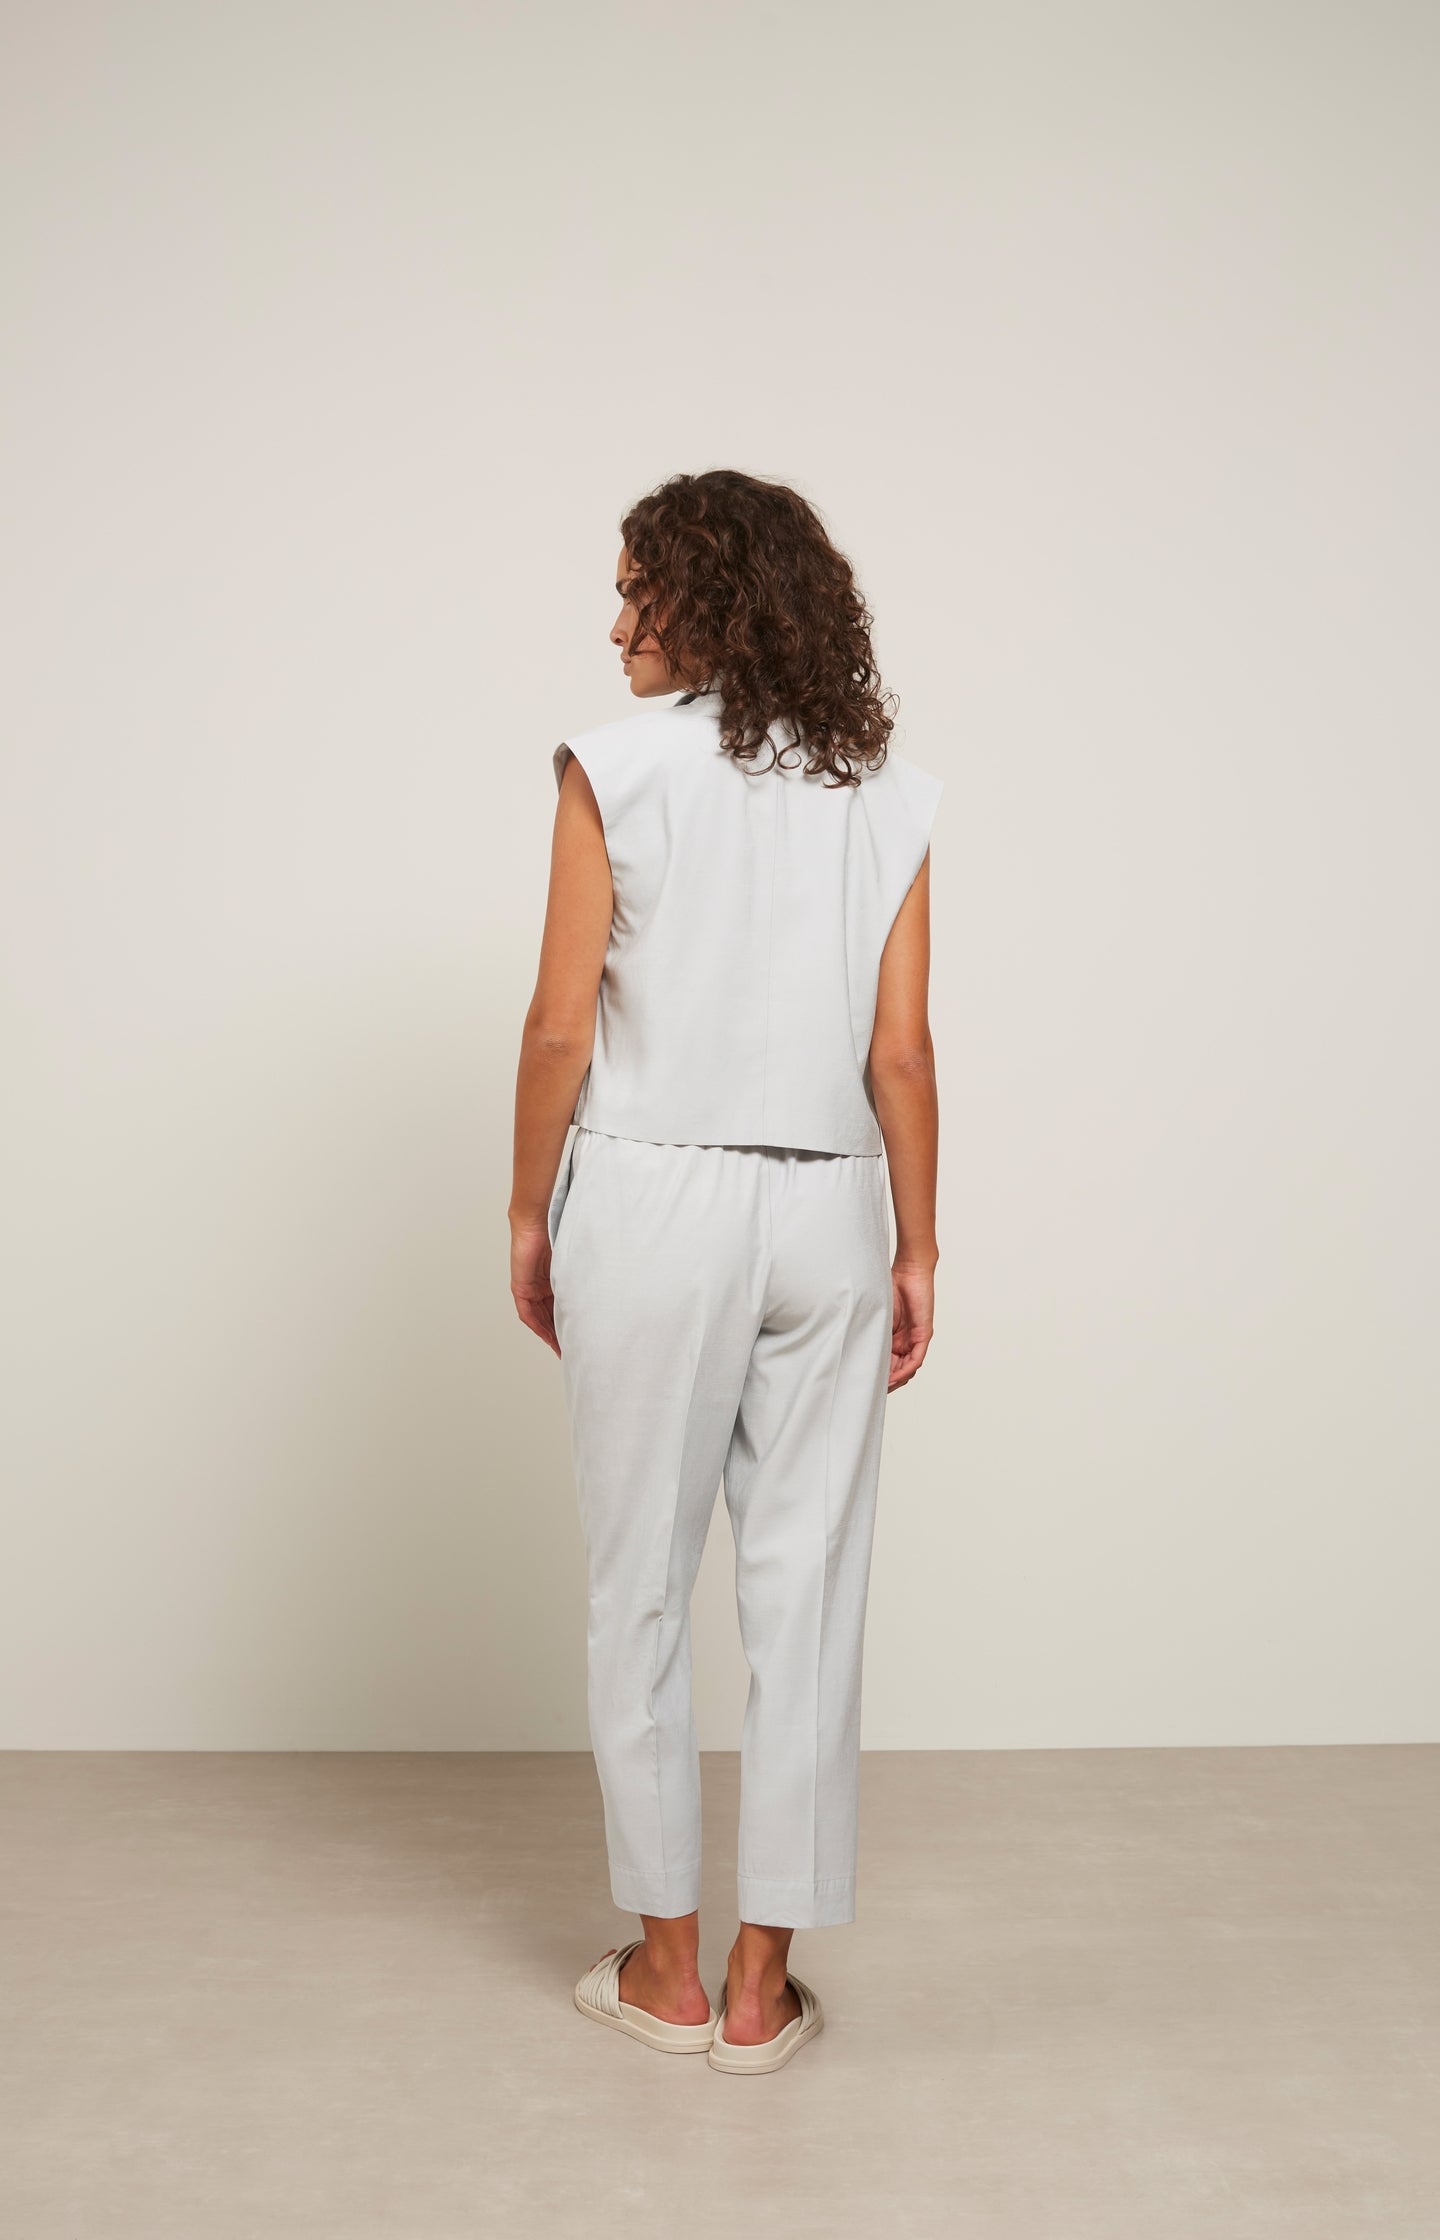 High waist pantalon with zip fly, buttons and pleated detail